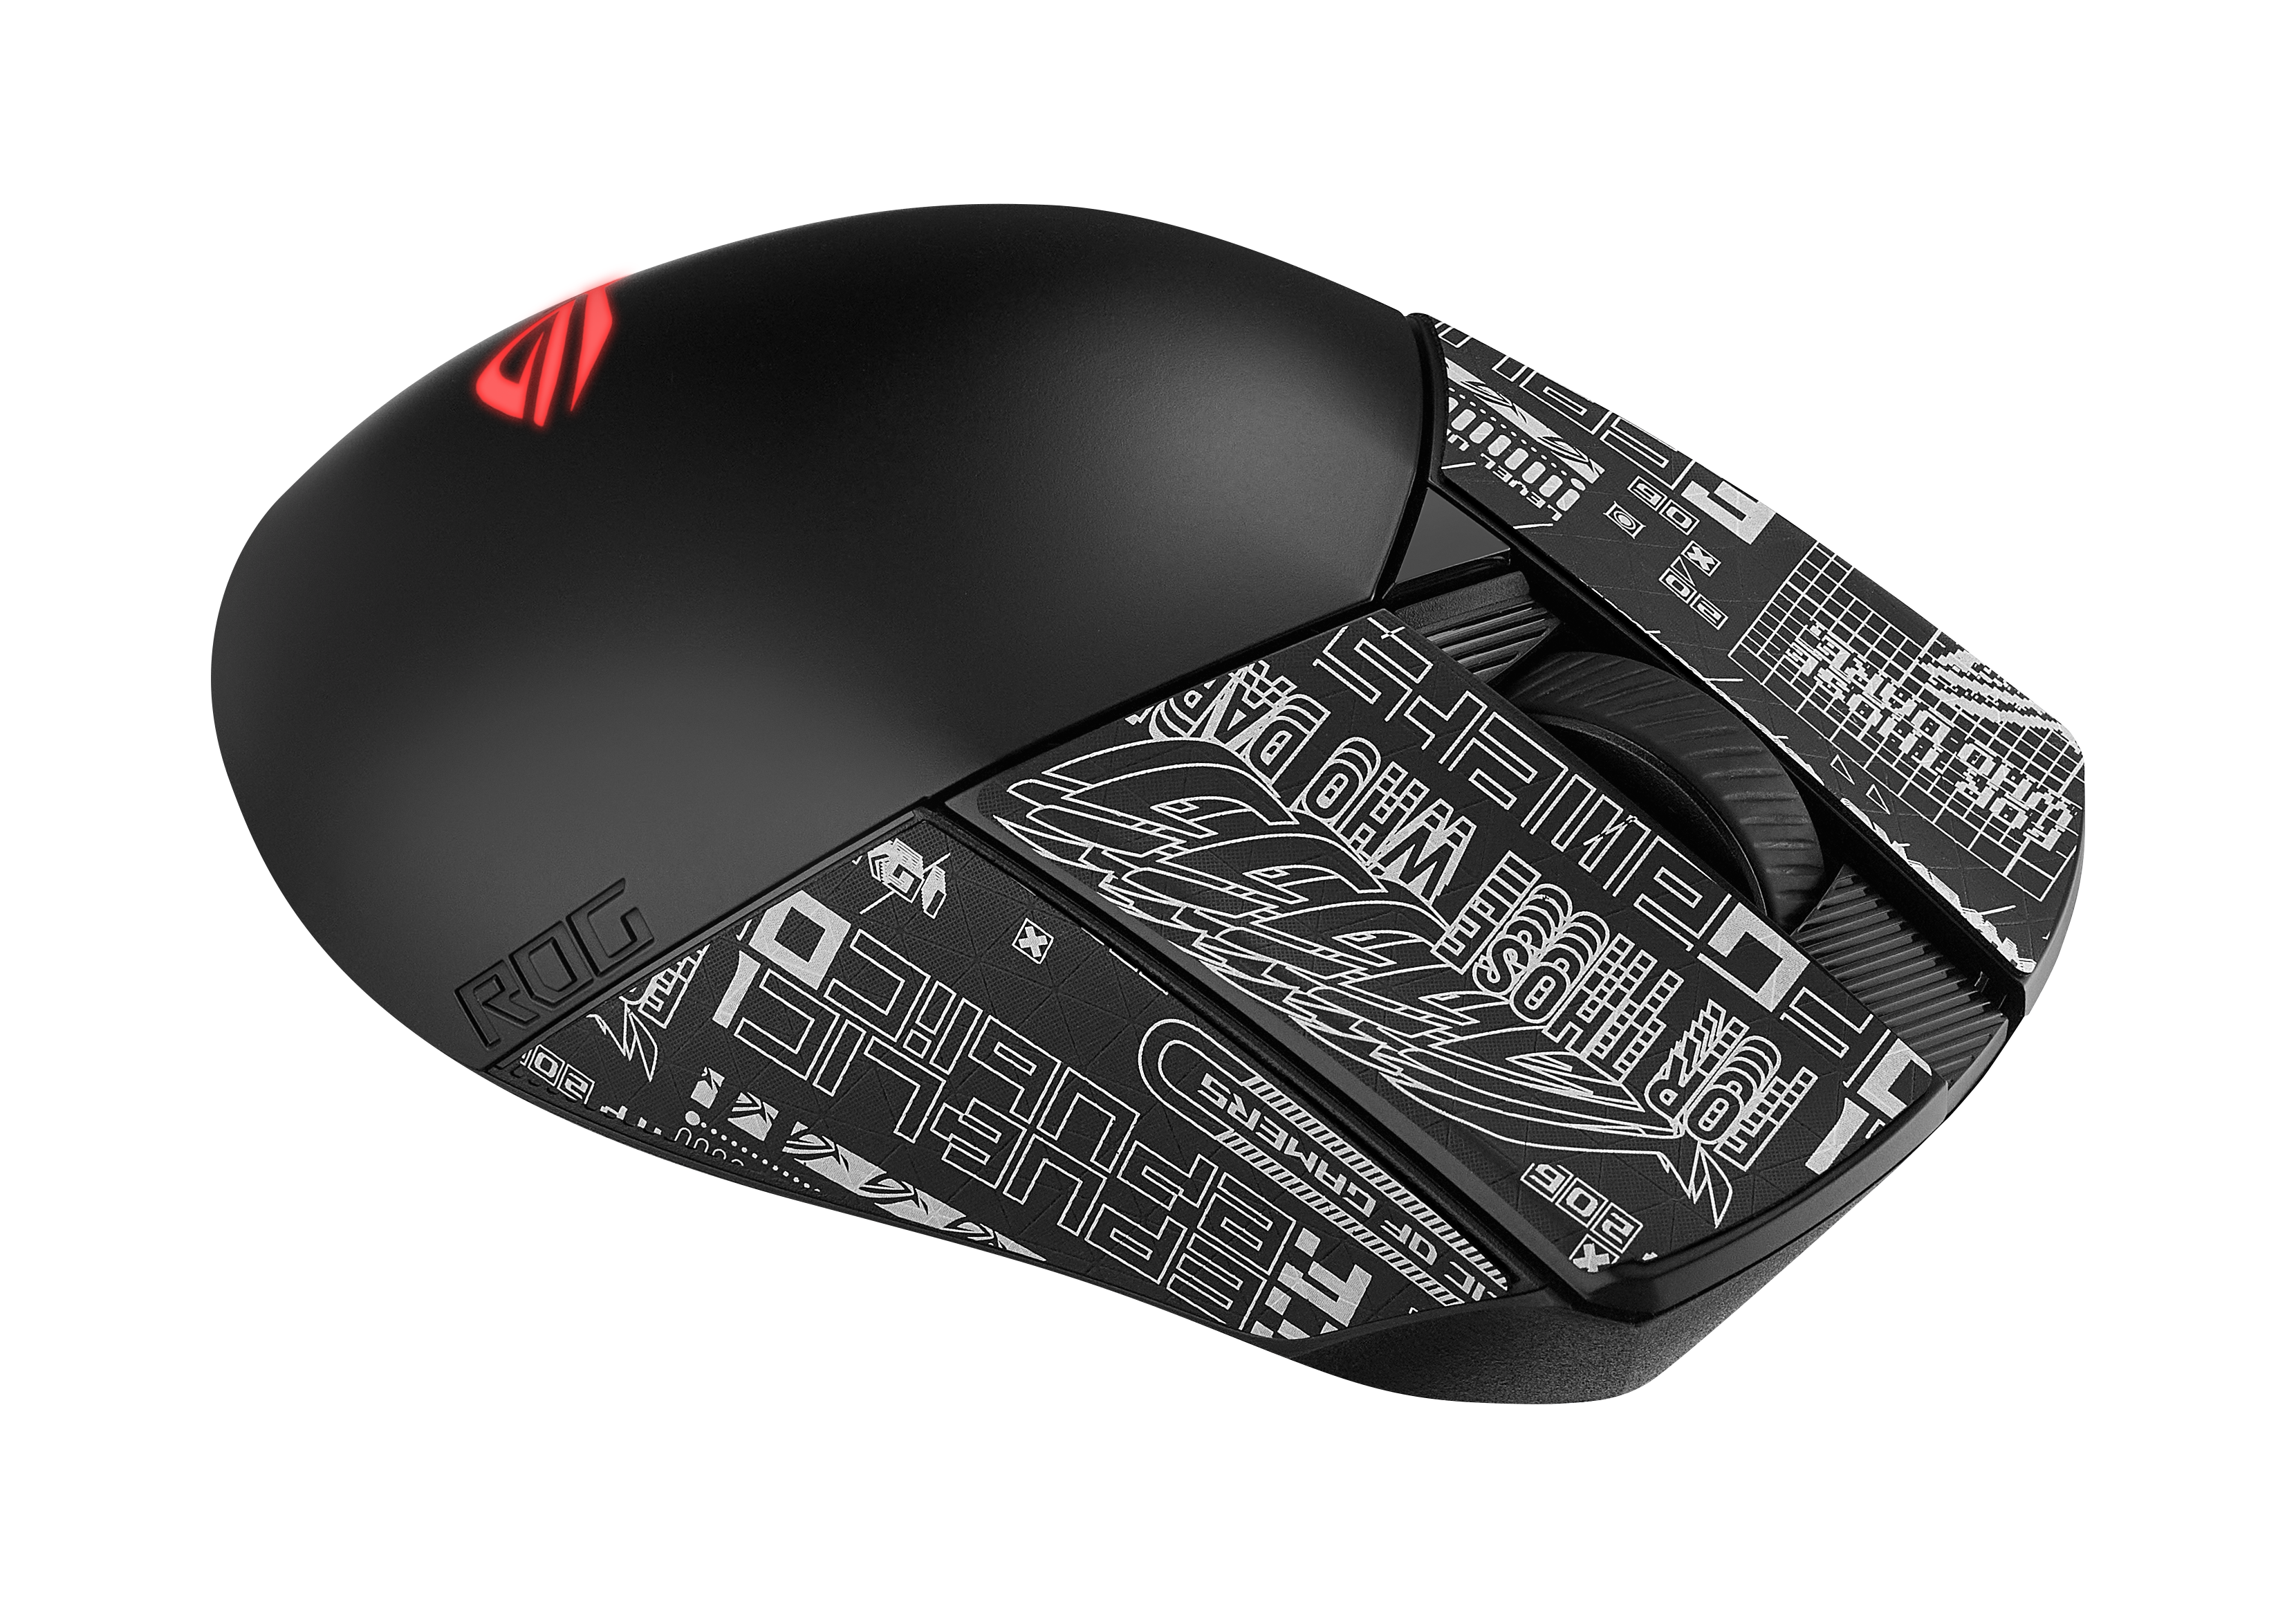 asus-announces-pricing-and-availability-for-its-rog-wireless-aimpoint-swappable-switch-mice-in-the-north-american-market